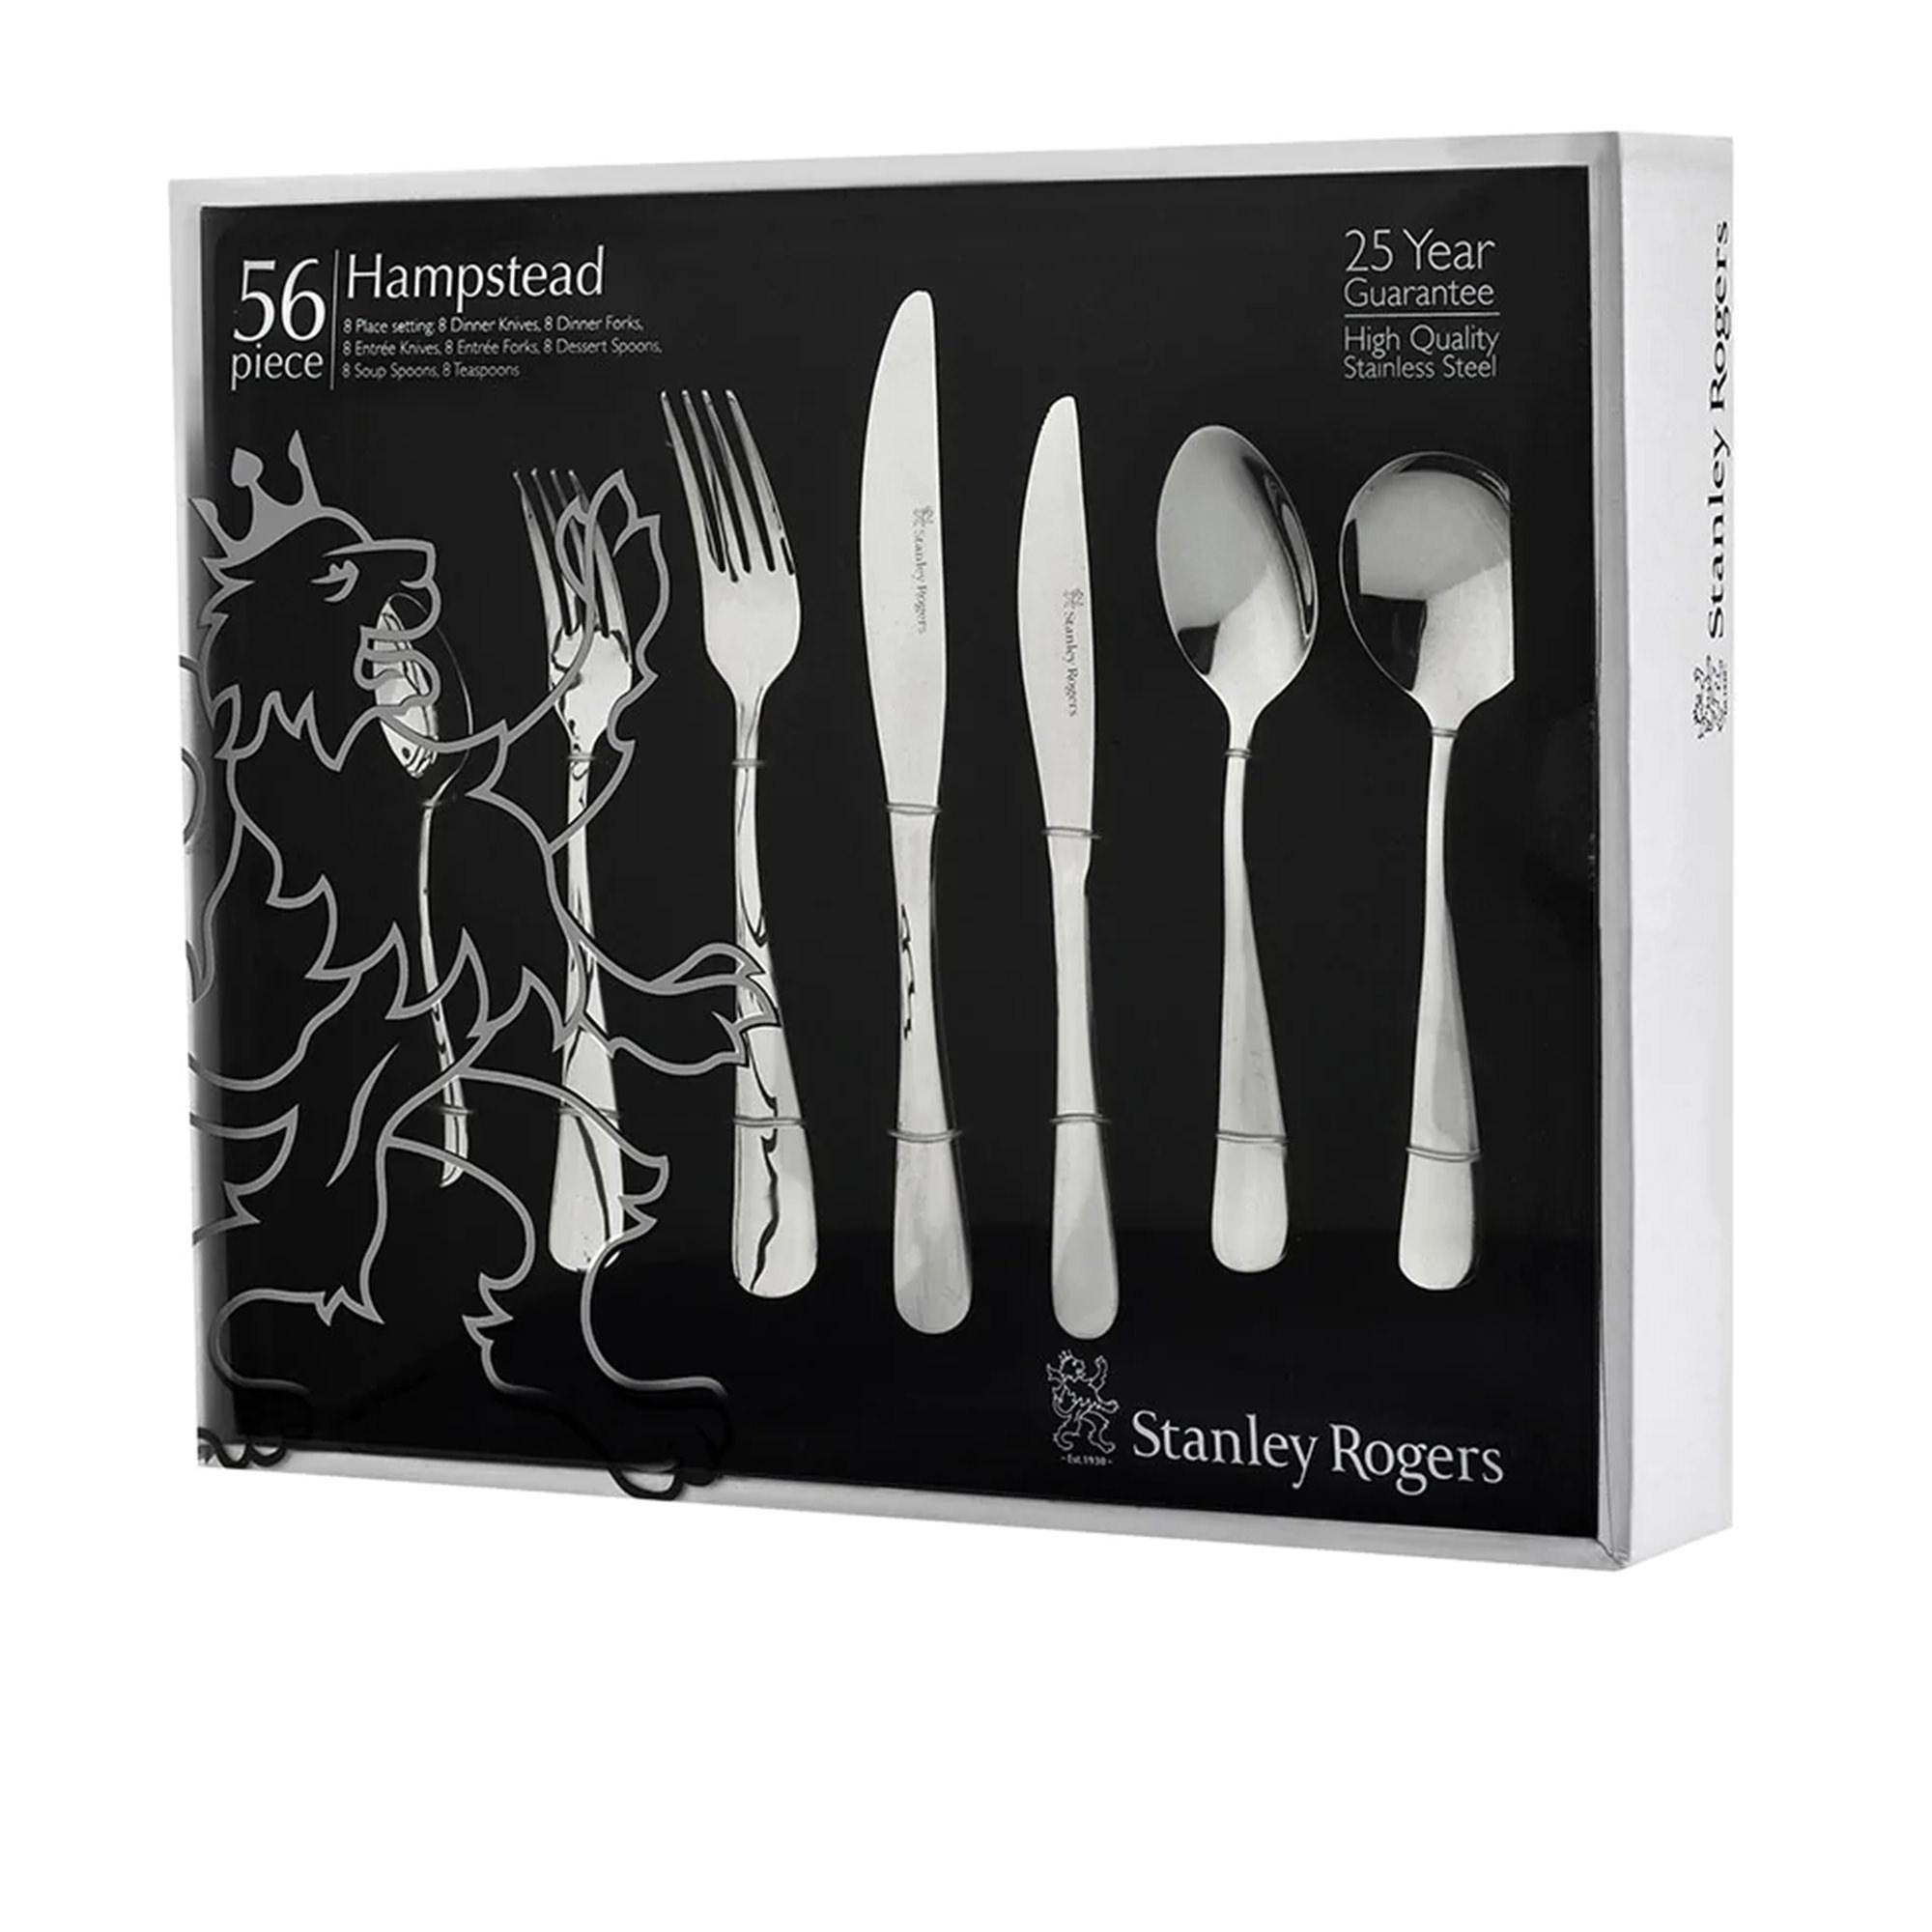 Stanley Rogers Hampstead Cutlery Set 56pc Image 5